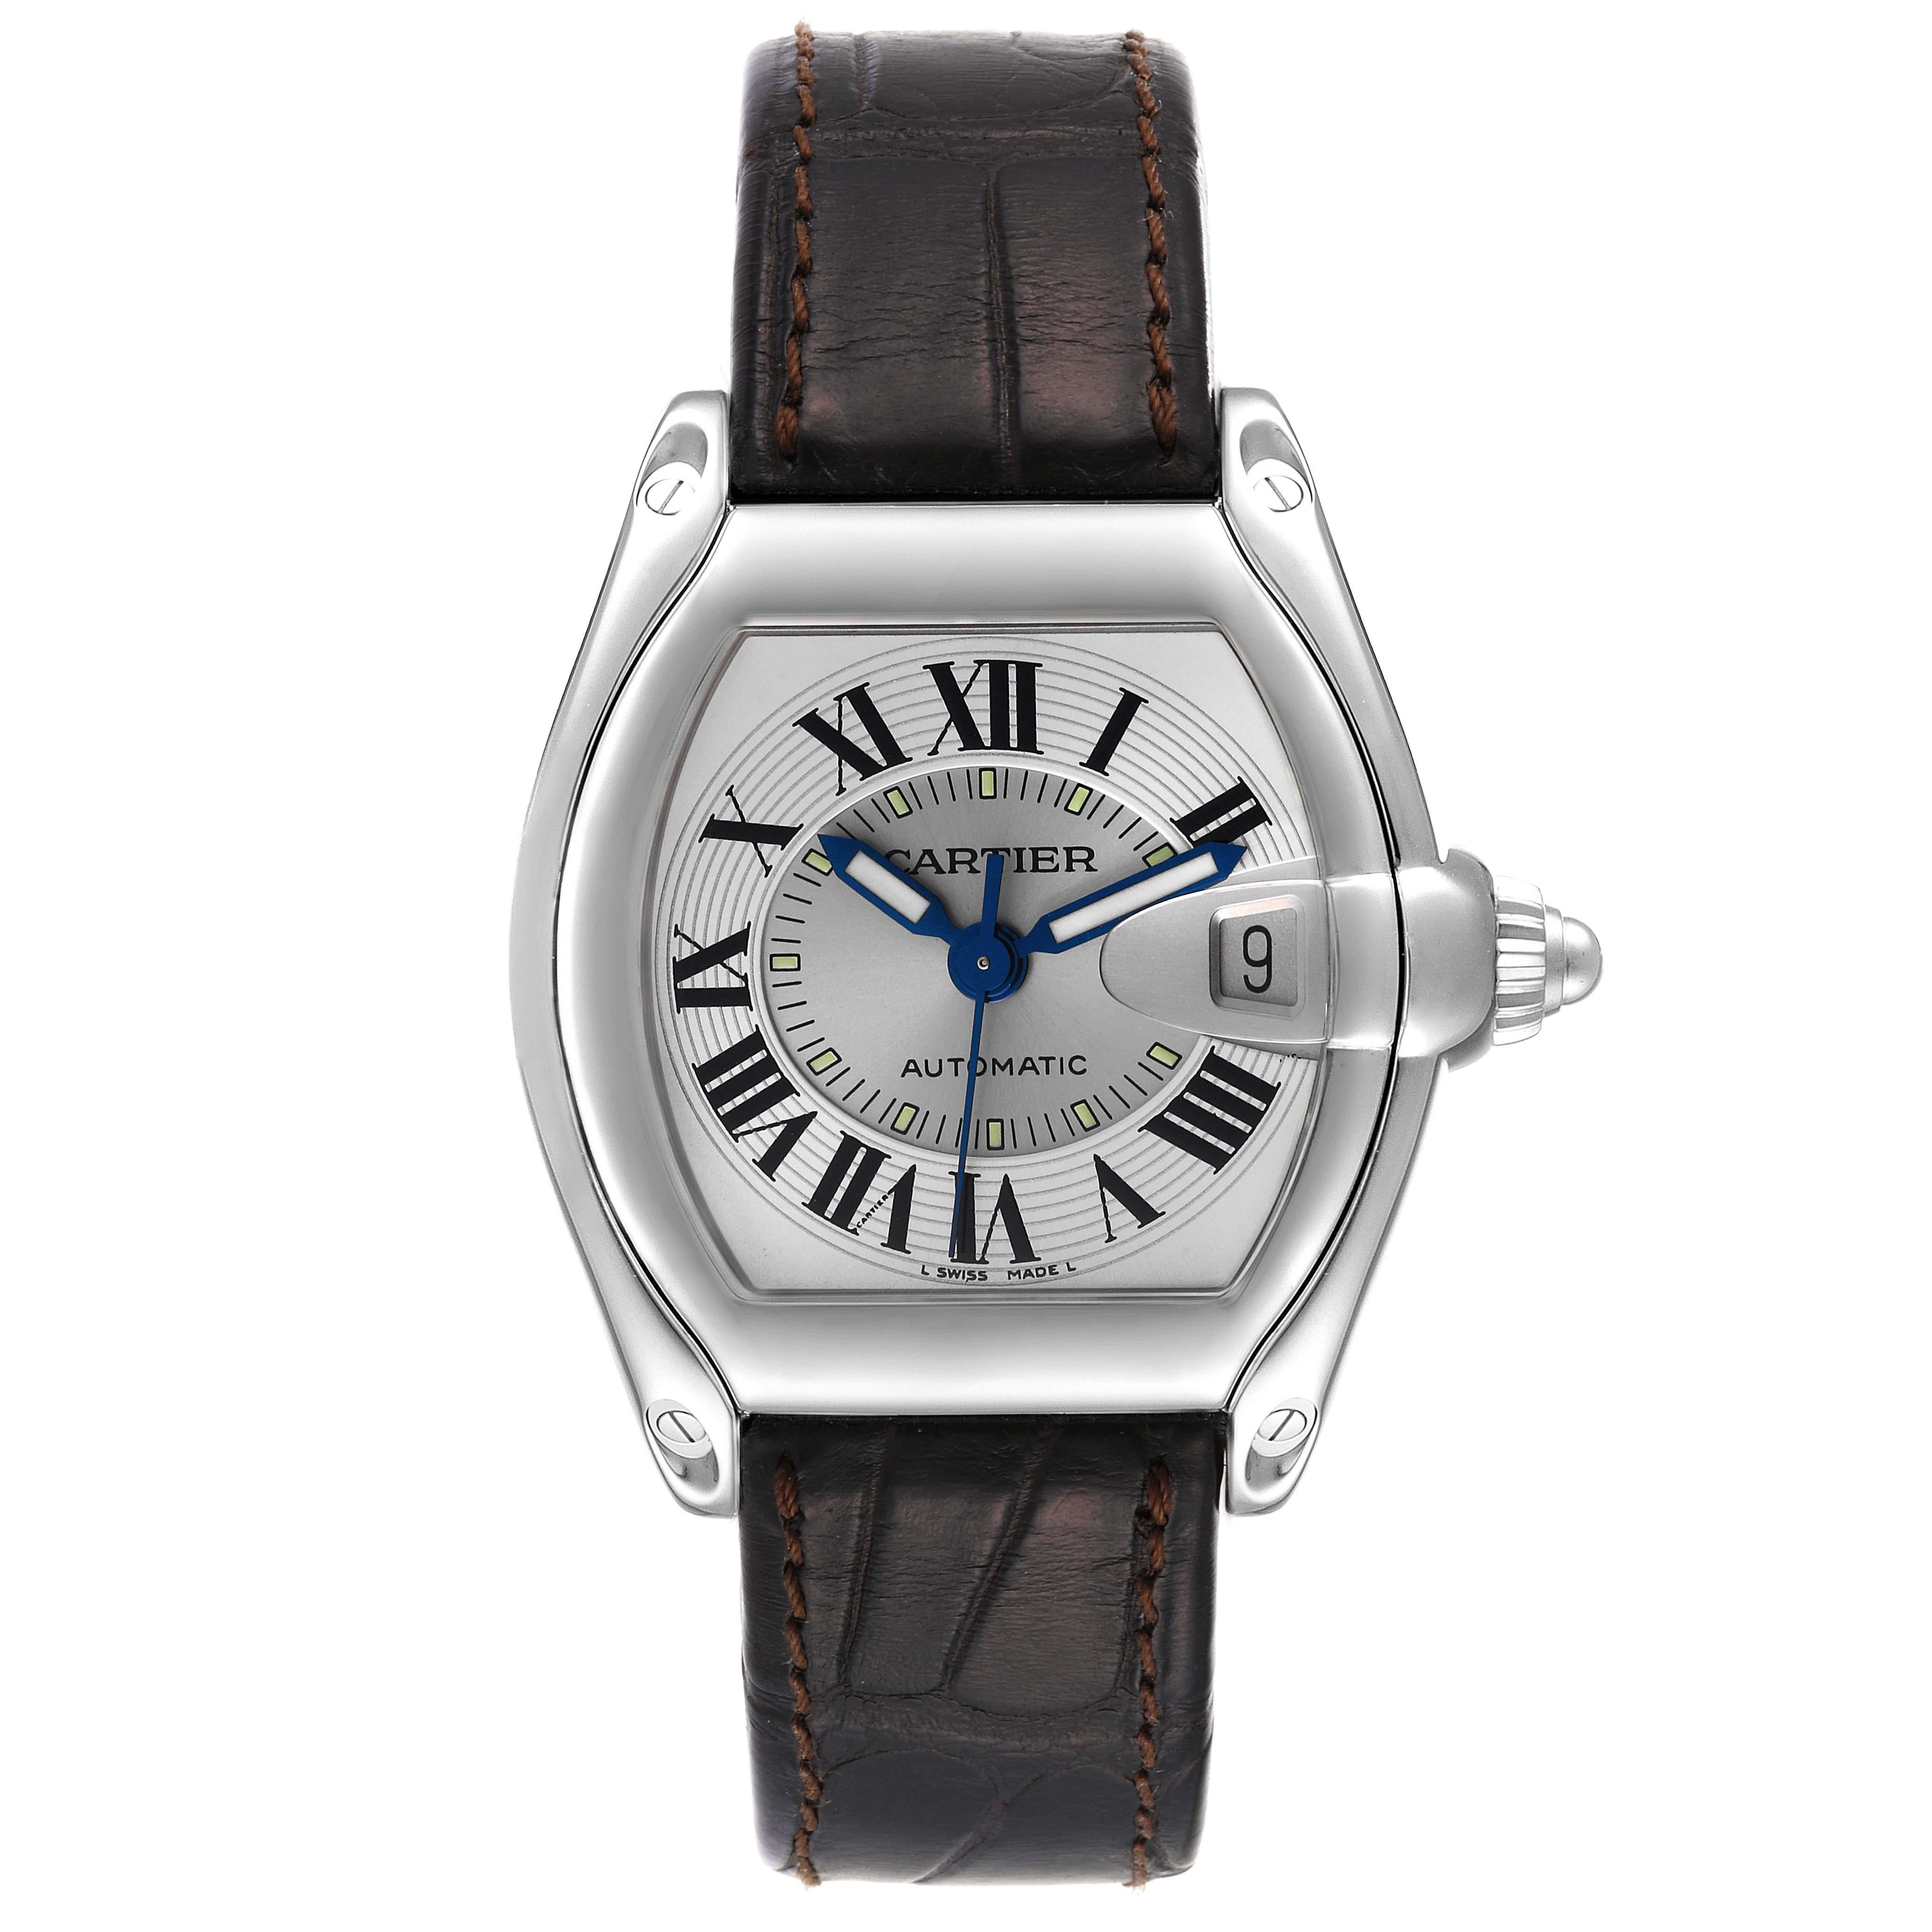 Cartier Roadster Silver Dial Brown Strap Steel Mens Watch W62000V3. Automatic self-winding movement. Stainless steel tonneau shaped case 38 x 43mm. . Scratch resistant sapphire crystal with cyclops magnifying glass. Silver sunray dial with black